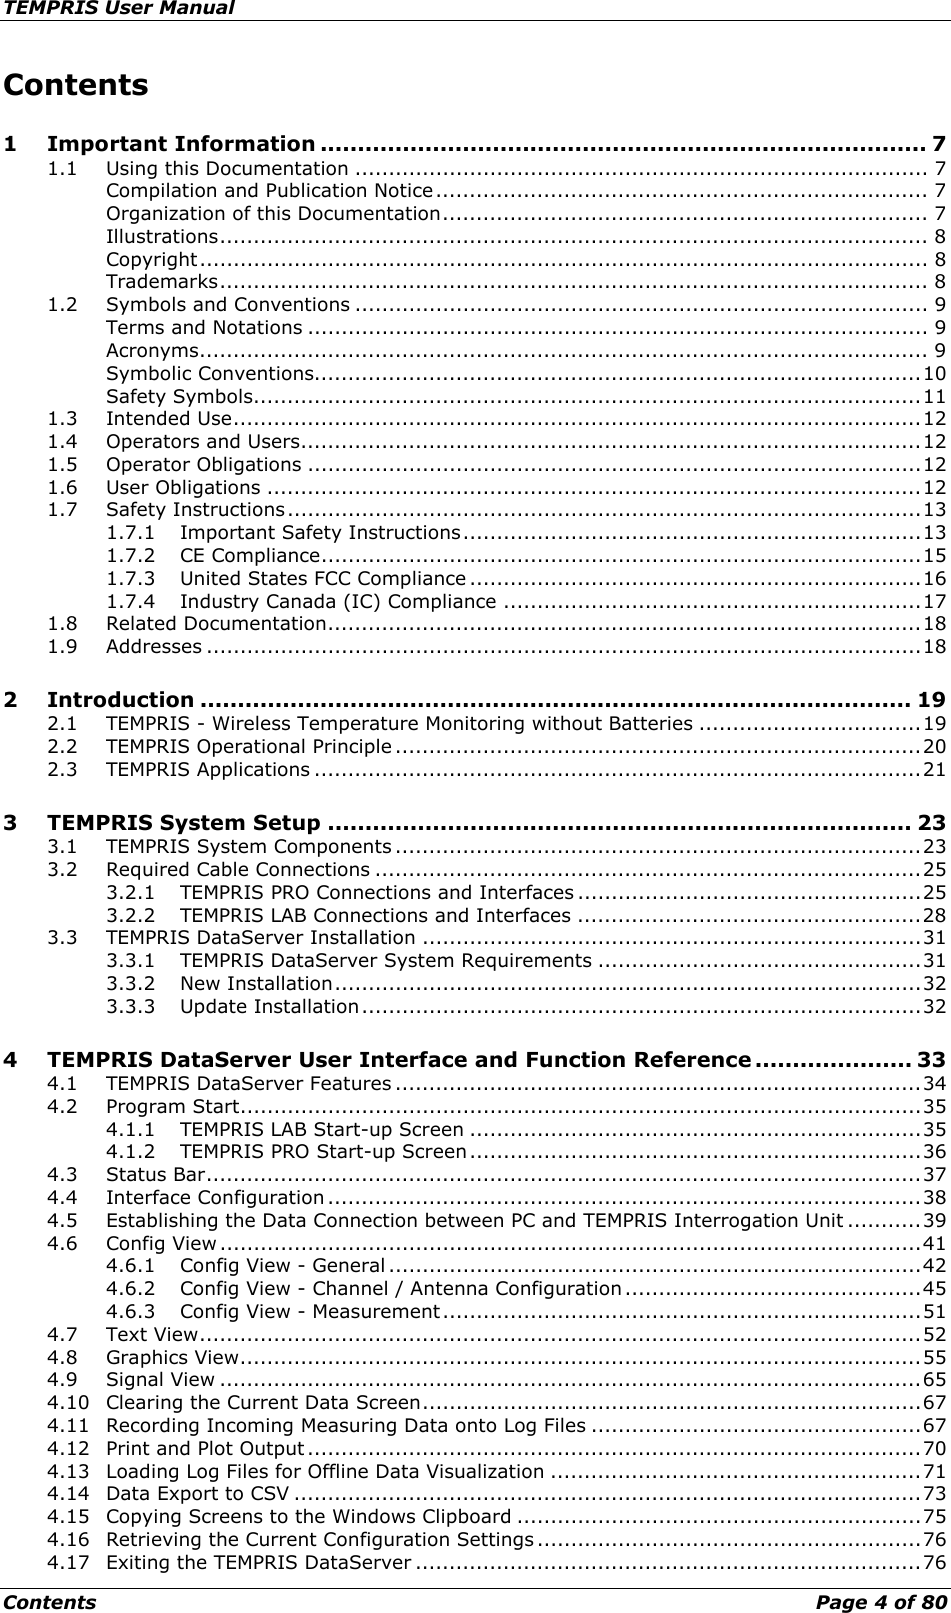 TEMPRIS User Manual Contents    Page 4 of 80 Contents 1 Important Information ................................................................................. 7 1.1 Using this Documentation ..................................................................................... 7 Compilation and Publication Notice ......................................................................... 7 Organization of this Documentation ........................................................................ 7 Illustrations ......................................................................................................... 8 Copyright ............................................................................................................ 8 Trademarks ......................................................................................................... 8 1.2 Symbols and Conventions ..................................................................................... 9 Terms and Notations ............................................................................................ 9 Acronyms ............................................................................................................ 9 Symbolic Conventions.......................................................................................... 10 Safety Symbols ................................................................................................... 11 1.3 Intended Use ...................................................................................................... 12 1.4 Operators and Users ............................................................................................ 12 1.5 Operator Obligations ........................................................................................... 12 1.6 User Obligations ................................................................................................. 12 1.7 Safety Instructions .............................................................................................. 13 1.7.1 Important Safety Instructions .................................................................... 13 1.7.2 CE Compliance ......................................................................................... 15 1.7.3 United States FCC Compliance ................................................................... 16 1.7.4 Industry Canada (IC) Compliance .............................................................. 17 1.8 Related Documentation ........................................................................................ 18 1.9 Addresses .......................................................................................................... 18 2 Introduction ............................................................................................... 19 2.1 TEMPRIS - Wireless Temperature Monitoring without Batteries ................................. 19 2.2 TEMPRIS Operational Principle .............................................................................. 20 2.3 TEMPRIS Applications .......................................................................................... 21 3 TEMPRIS System Setup .............................................................................. 23 3.1 TEMPRIS System Components .............................................................................. 23 3.2 Required Cable Connections ................................................................................. 25 3.2.1 TEMPRIS PRO Connections and Interfaces ................................................... 25 3.2.2 TEMPRIS LAB Connections and Interfaces ................................................... 28 3.3 TEMPRIS DataServer Installation .......................................................................... 31 3.3.1 TEMPRIS DataServer System Requirements ................................................ 31 3.3.2 New Installation ....................................................................................... 32 3.3.3 Update Installation ................................................................................... 32 4 TEMPRIS DataServer User Interface and Function Reference ..................... 33 4.1 TEMPRIS DataServer Features .............................................................................. 34 4.2 Program Start ..................................................................................................... 35 4.1.1 TEMPRIS LAB Start-up Screen ................................................................... 35 4.1.2 TEMPRIS PRO Start-up Screen ................................................................... 36 4.3 Status Bar .......................................................................................................... 37 4.4 Interface Configuration ........................................................................................ 38 4.5 Establishing the Data Connection between PC and TEMPRIS Interrogation Unit ........... 39 4.6 Config View ........................................................................................................ 41 4.6.1 Config View - General ............................................................................... 42 4.6.2 Config View - Channel / Antenna Configuration ............................................ 45 4.6.3 Config View - Measurement ....................................................................... 51 4.7 Text View ........................................................................................................... 52 4.8 Graphics View ..................................................................................................... 55 4.9 Signal View ........................................................................................................ 65 4.10 Clearing the Current Data Screen .......................................................................... 67 4.11 Recording Incoming Measuring Data onto Log Files ................................................. 67 4.12 Print and Plot Output ........................................................................................... 70 4.13 Loading Log Files for Offline Data Visualization ....................................................... 71 4.14 Data Export to CSV ............................................................................................. 73 4.15 Copying Screens to the Windows Clipboard ............................................................ 75 4.16 Retrieving the Current Configuration Settings ......................................................... 76 4.17 Exiting the TEMPRIS DataServer ........................................................................... 76 